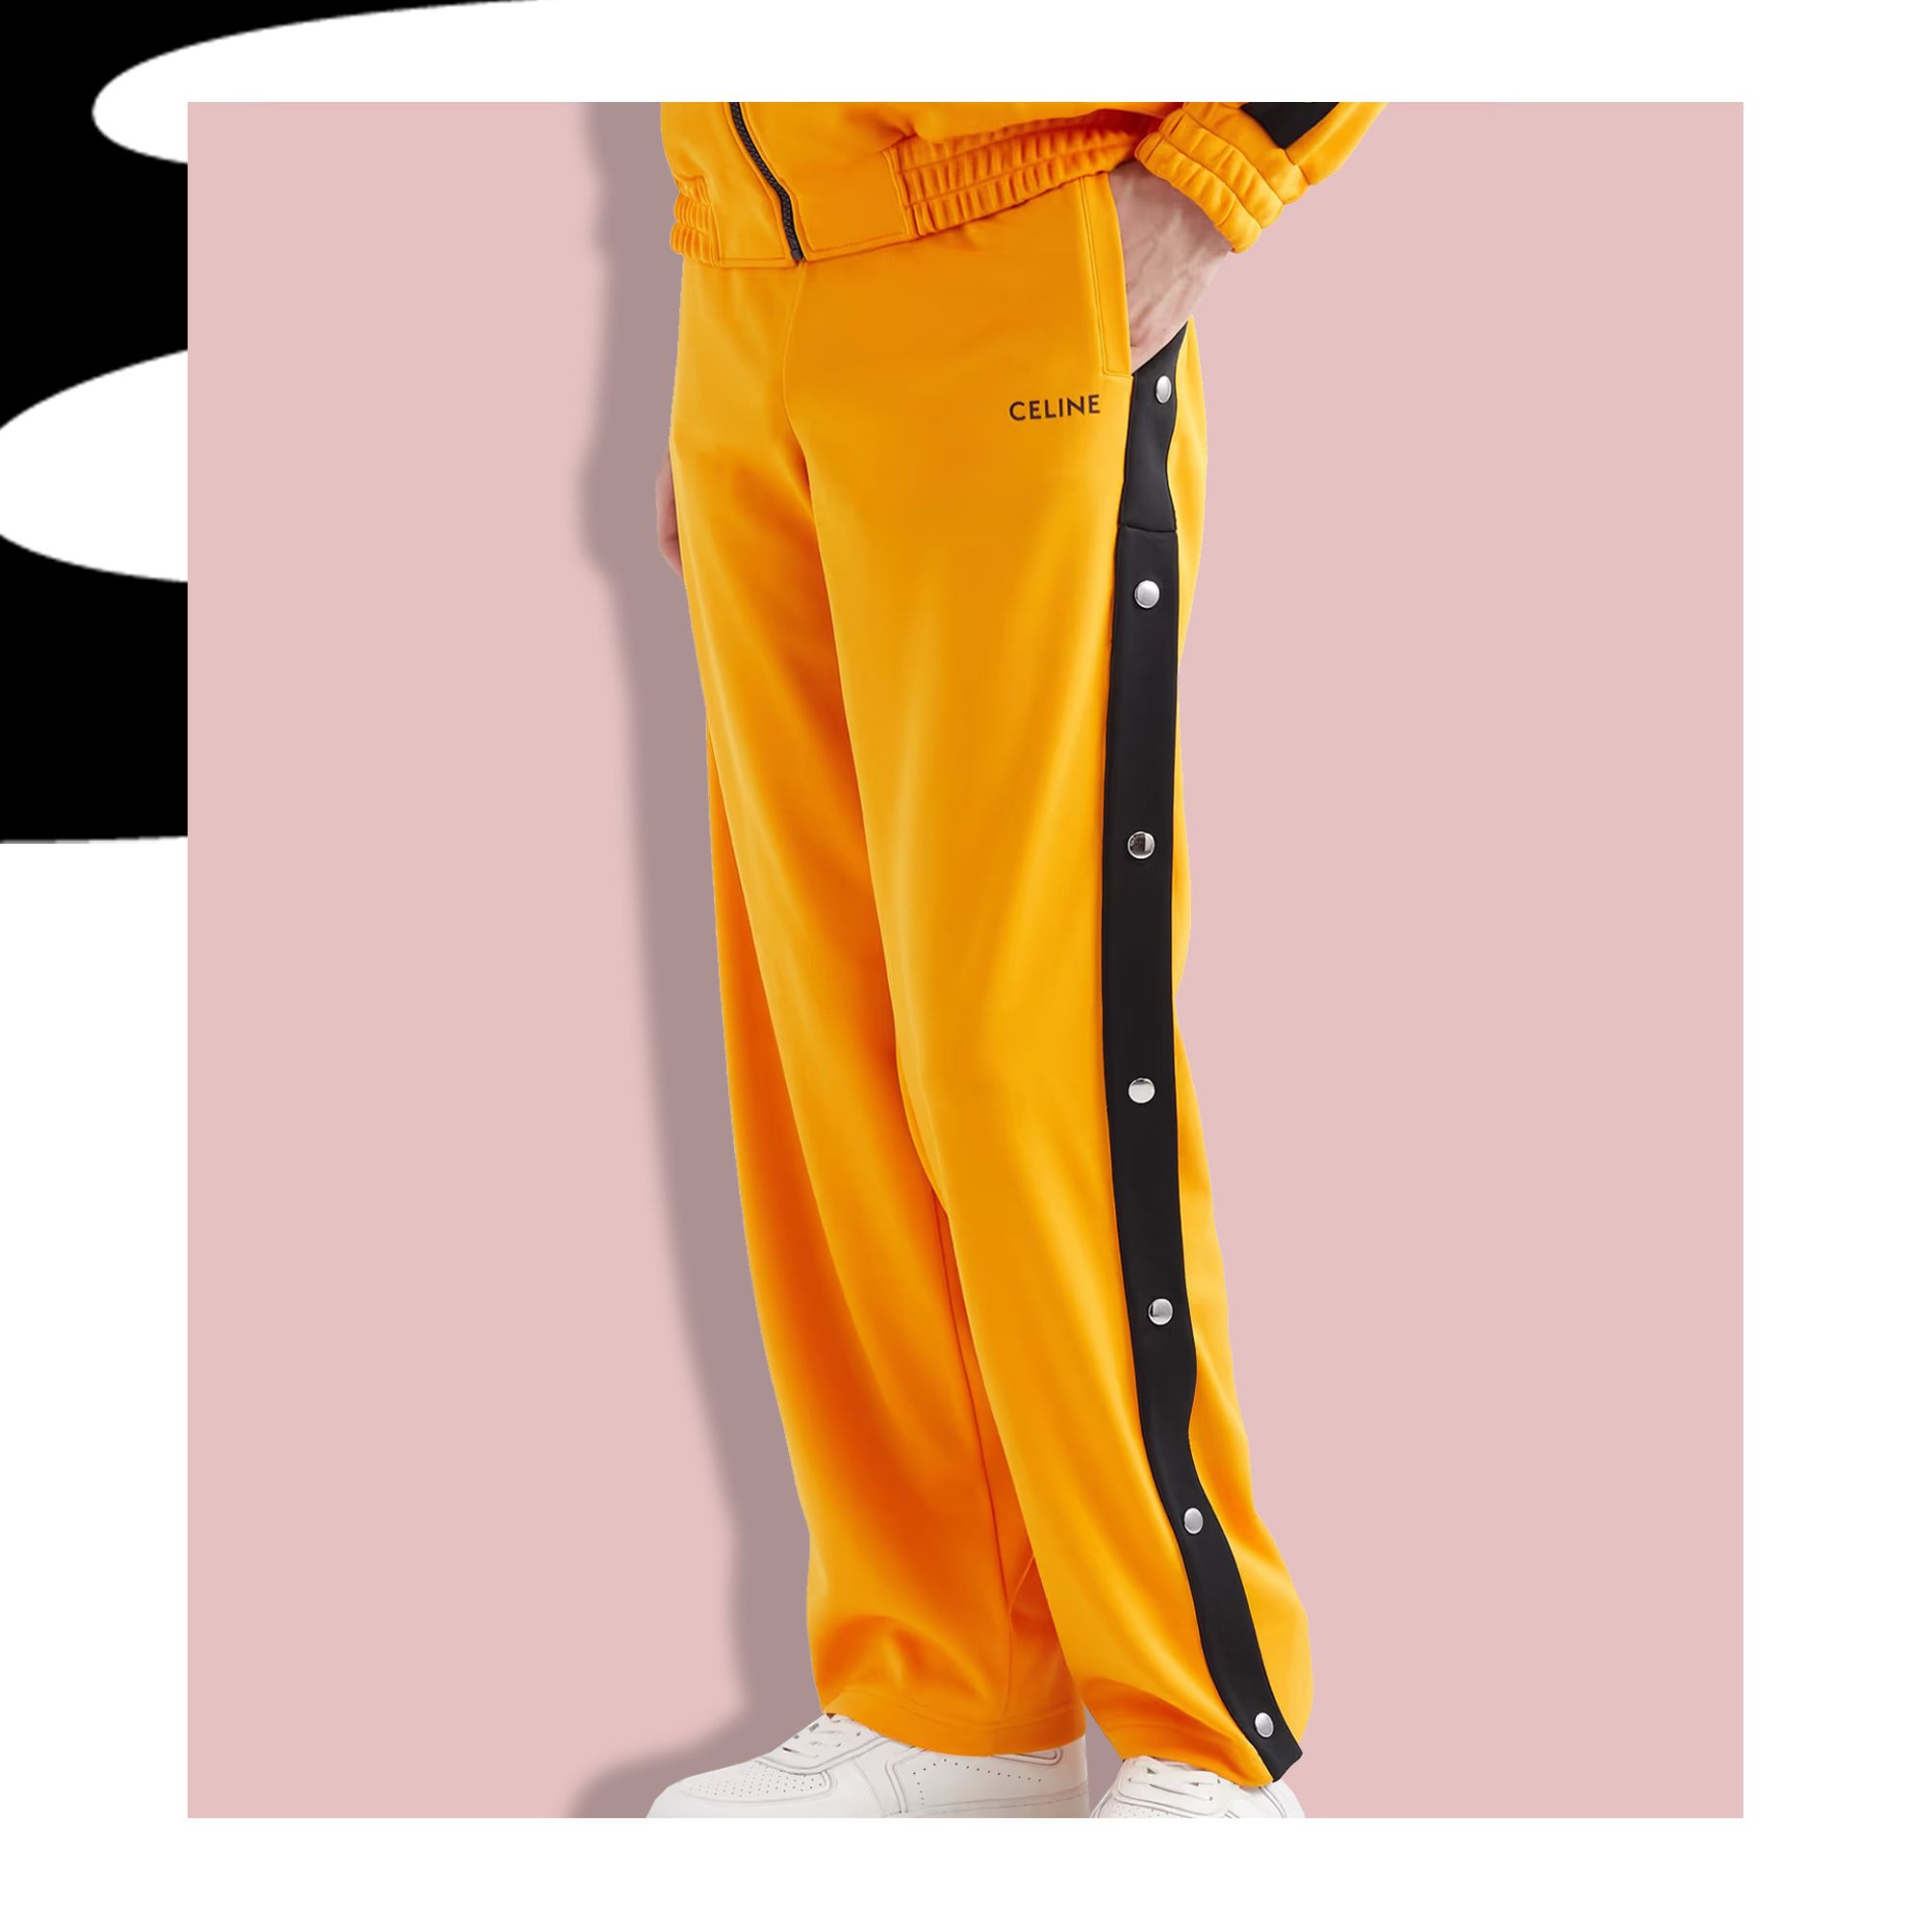 19 Track Pants That Let You Dress Up While Dressing Down